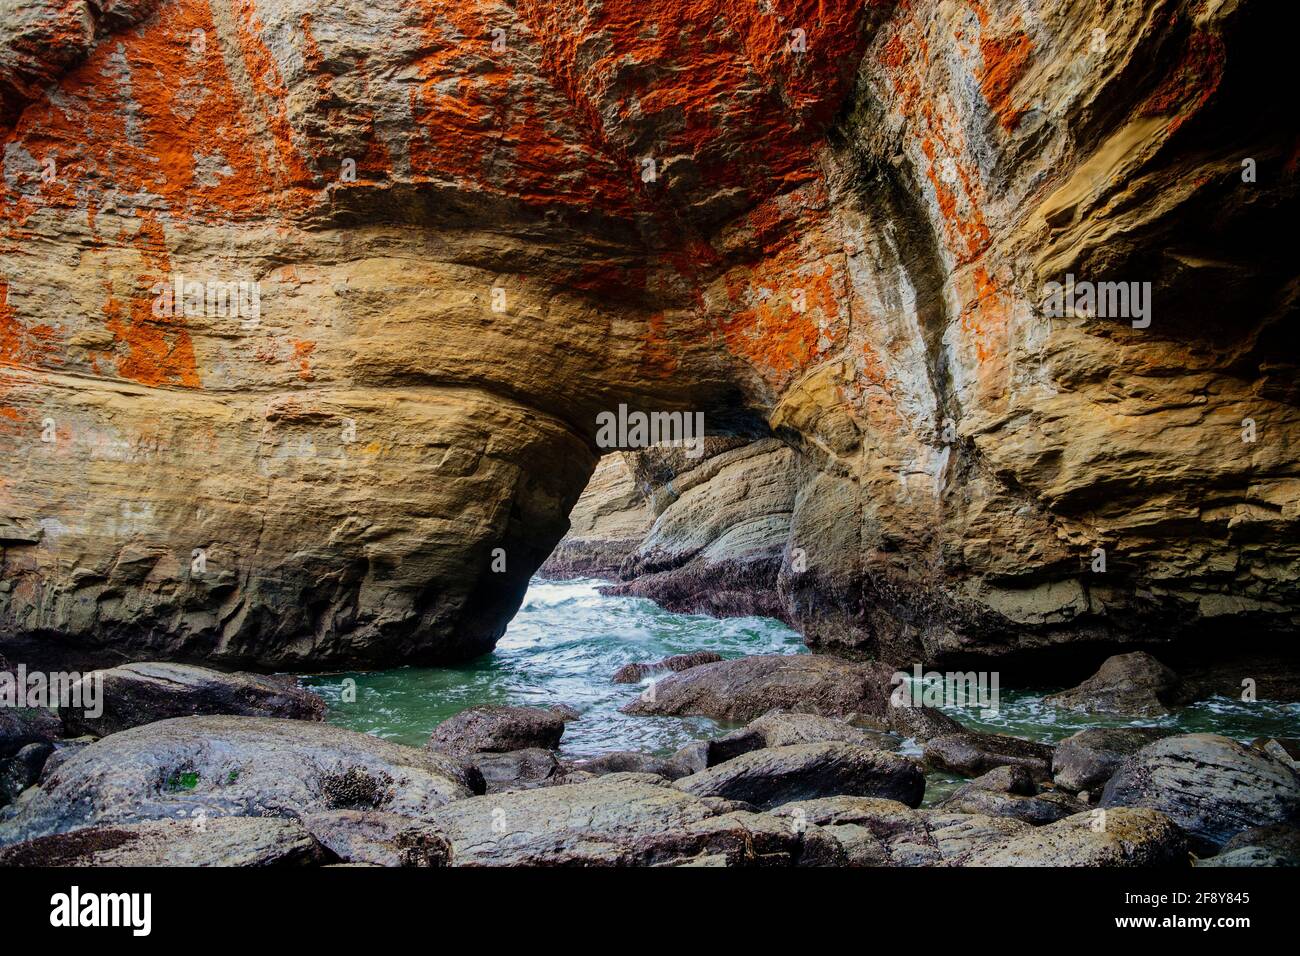 Rock formation eroded by sea, Devils Punch Bowl, Newport, Oregon, USA Stock Photo